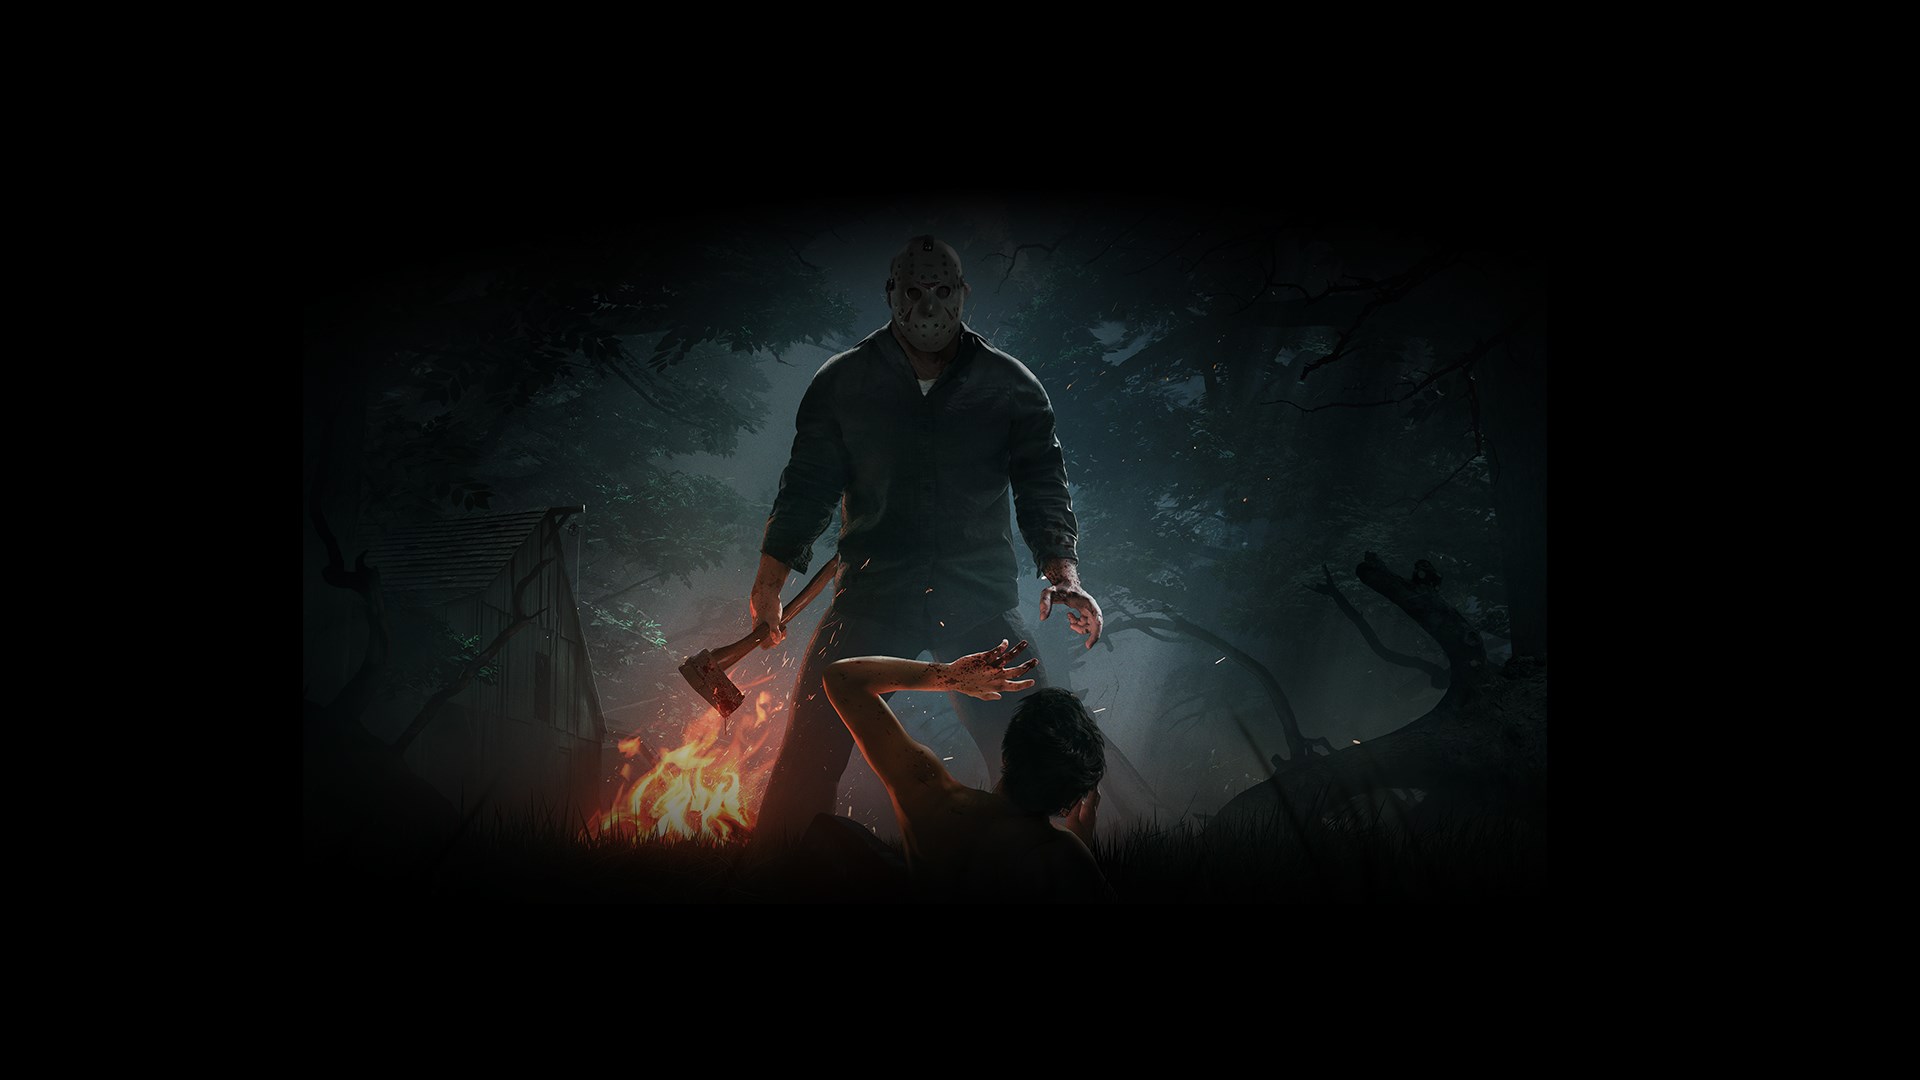 xbox store friday the 13th